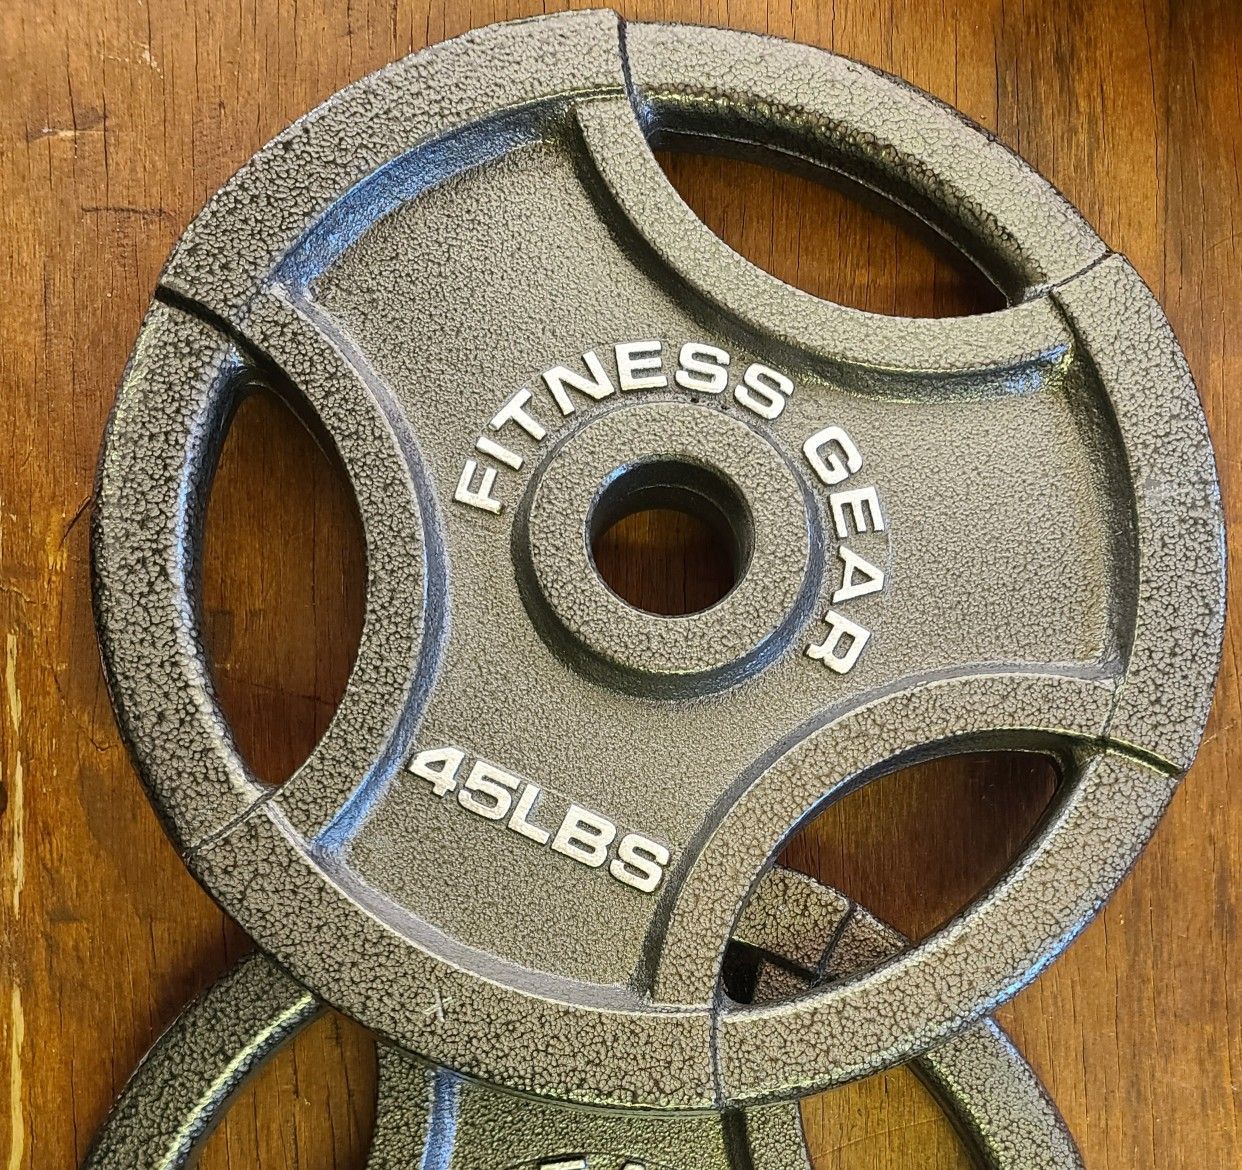 Pair of 45 pound Olympic weight plates new